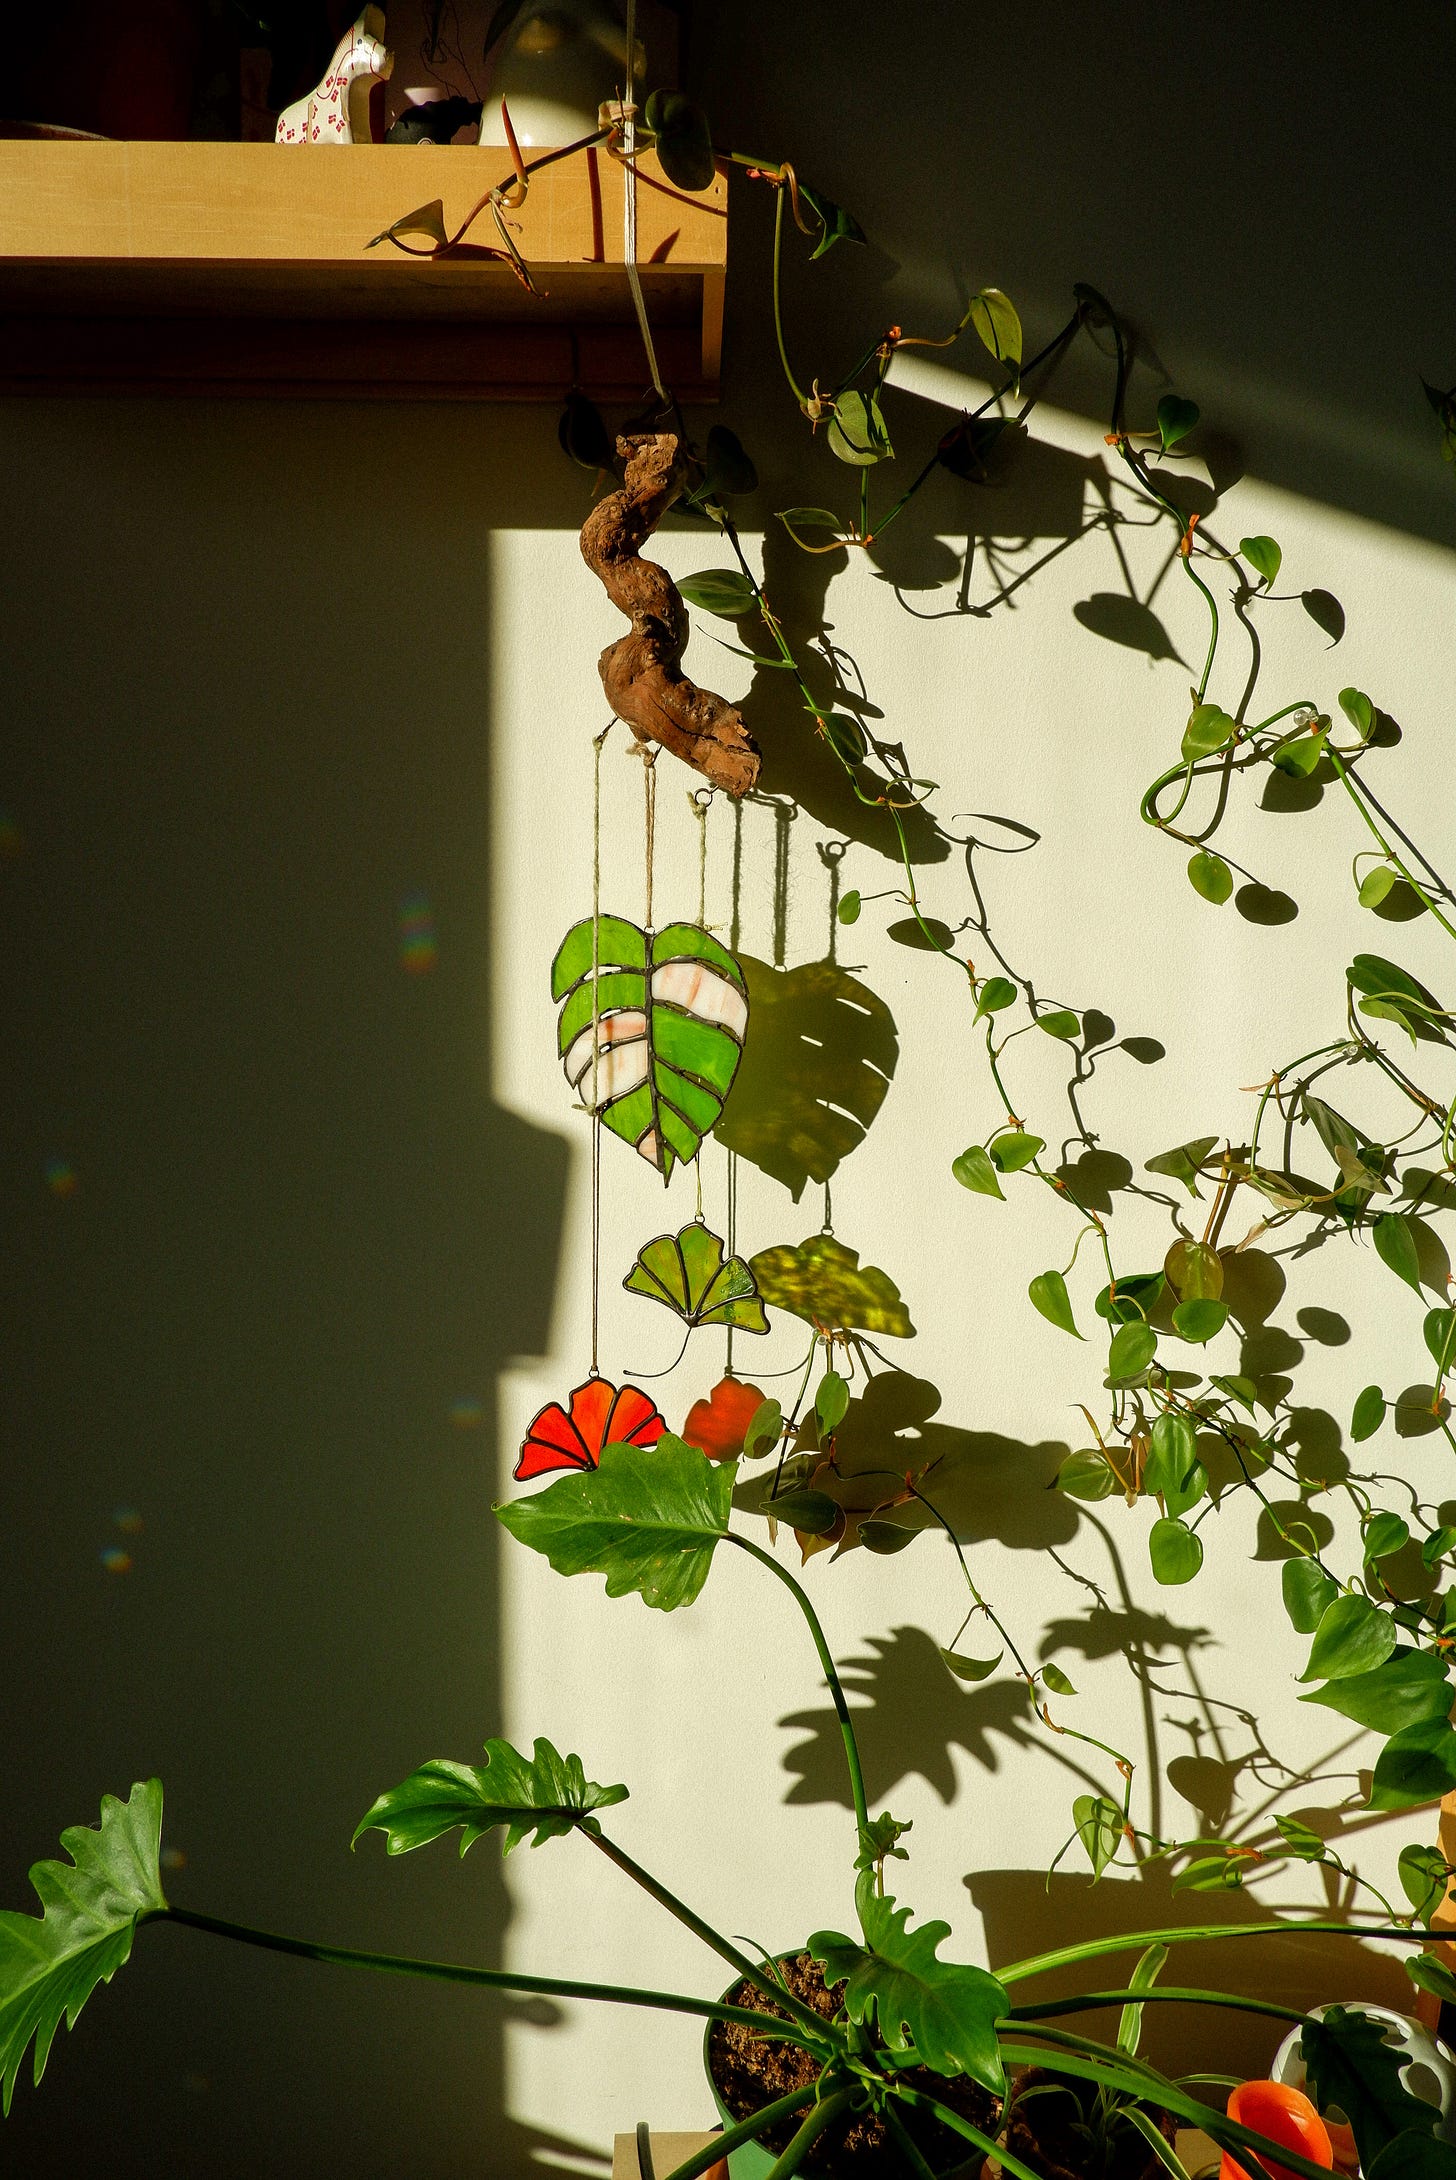 plant vines climbing a wall up to a wooden shelf. there are three stained glass leaves hanging from a stick off the shelf. the light is illuminating the vines and stained glass